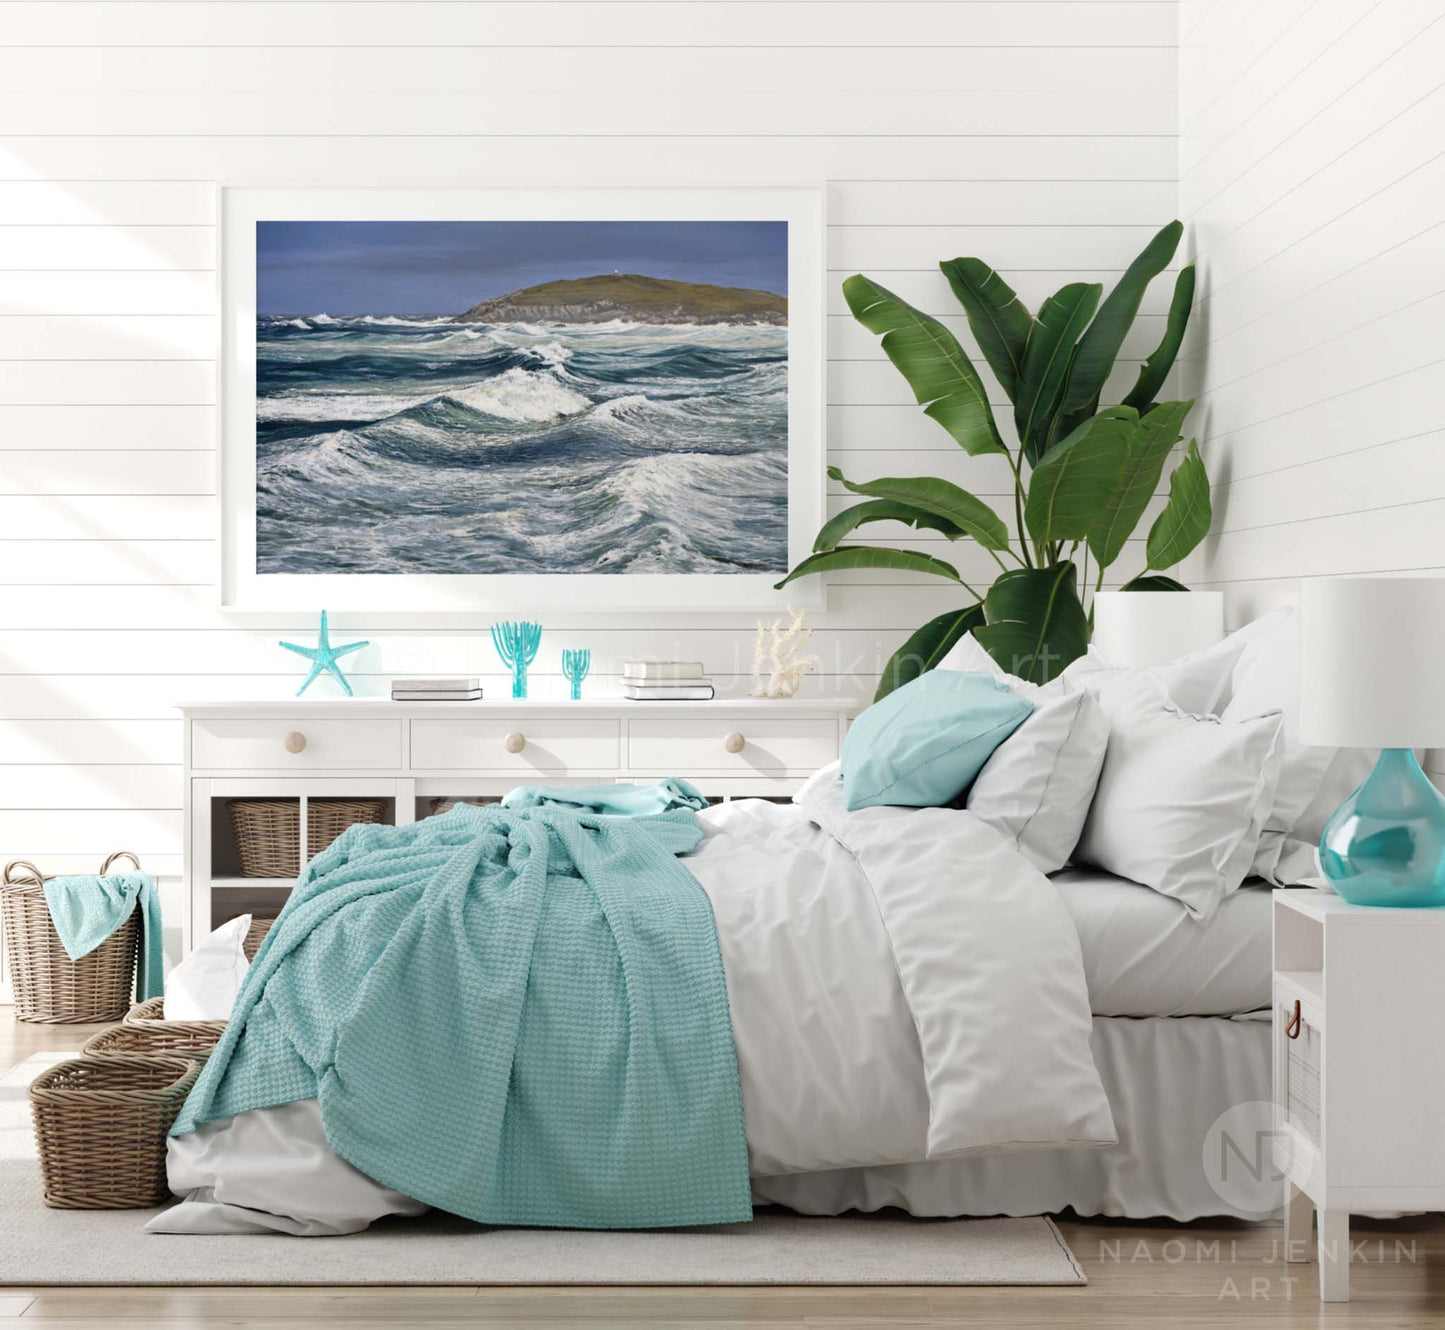 Seascape print of Fistral Beach in a bedroom setting by artist Naomi Jenkin Art in a white frame